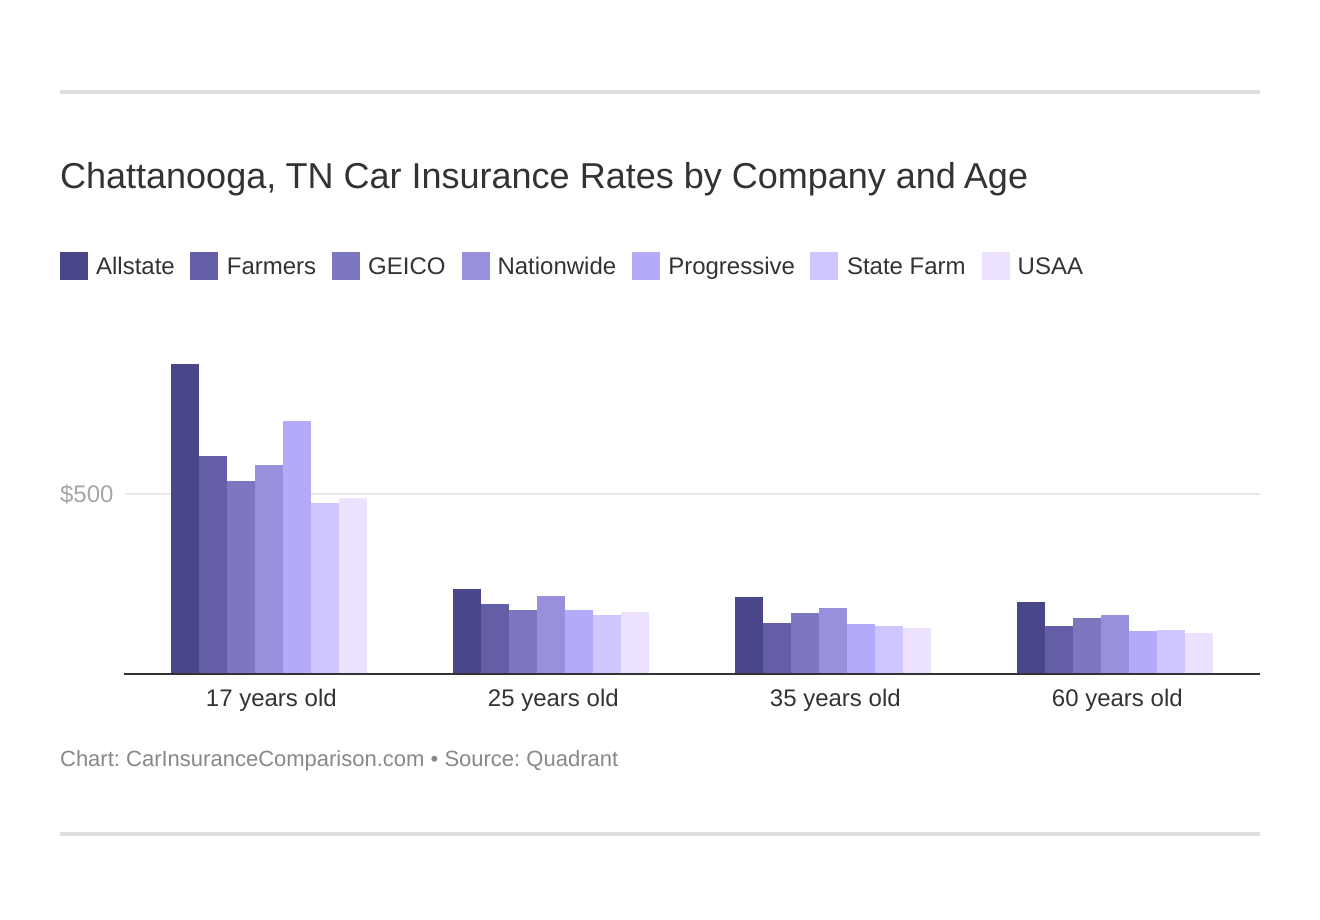 Chattanooga, TN Car Insurance Rates by Company and Age